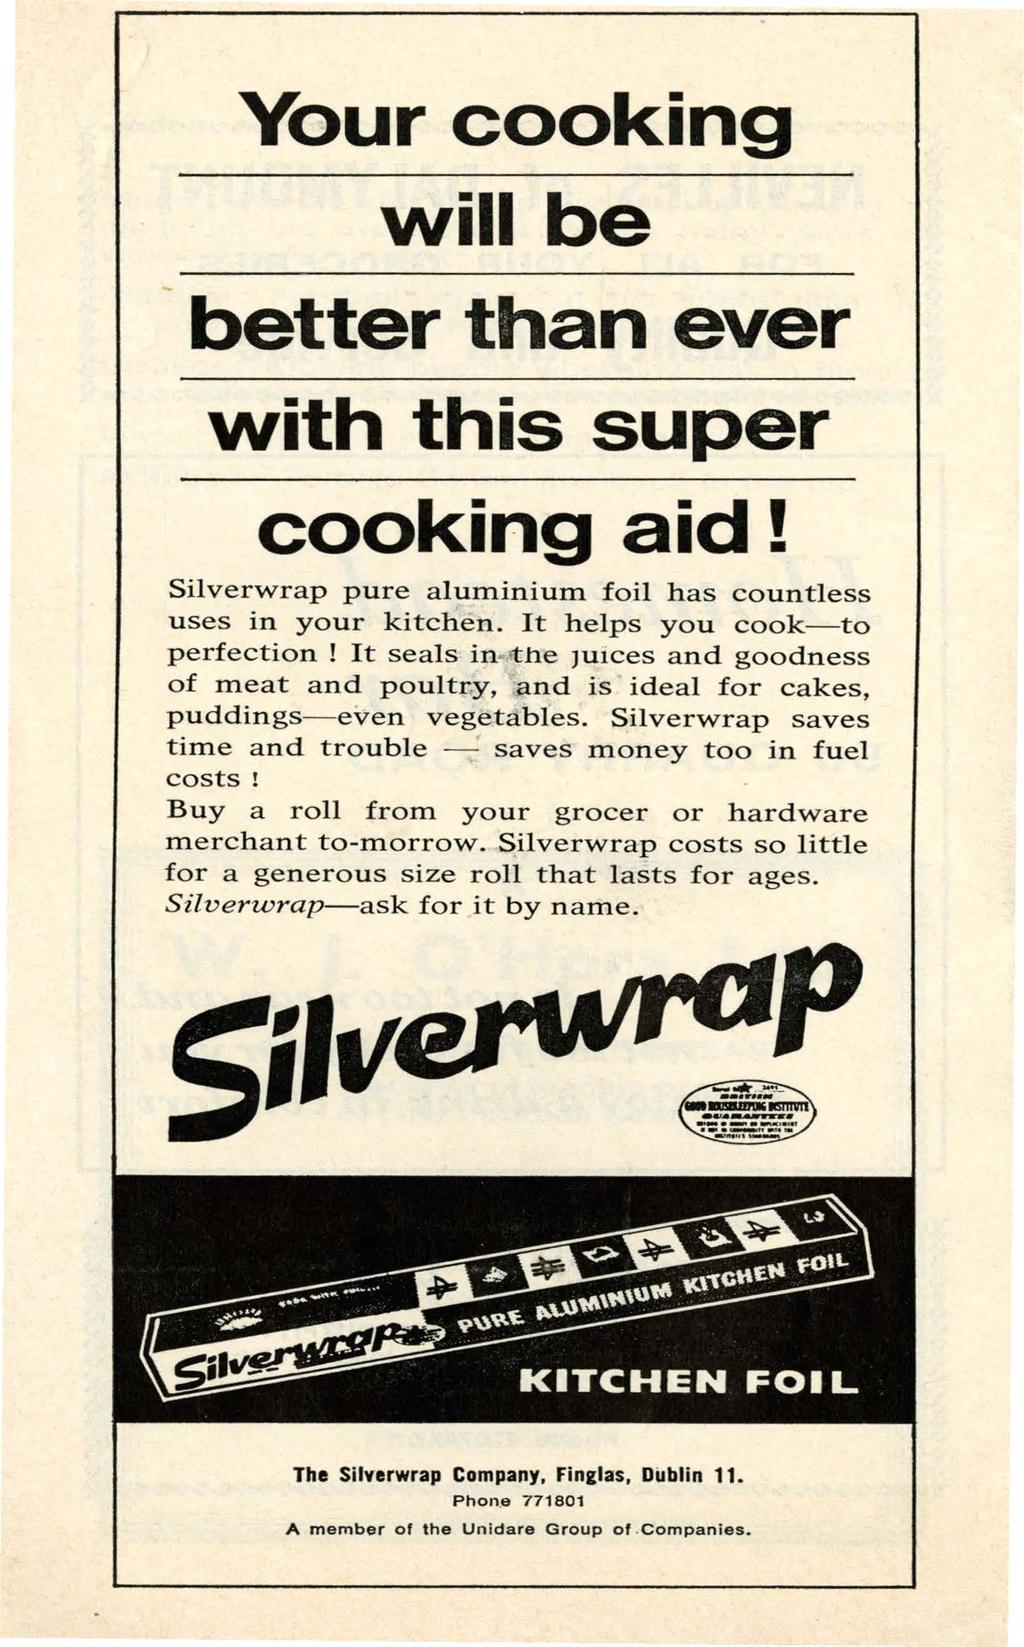 Your cooking will be better than ever with this super cooking aid! Silverwrap pure aluminium foil has countless uses in your kitchen. It helps you cook-to perfection!